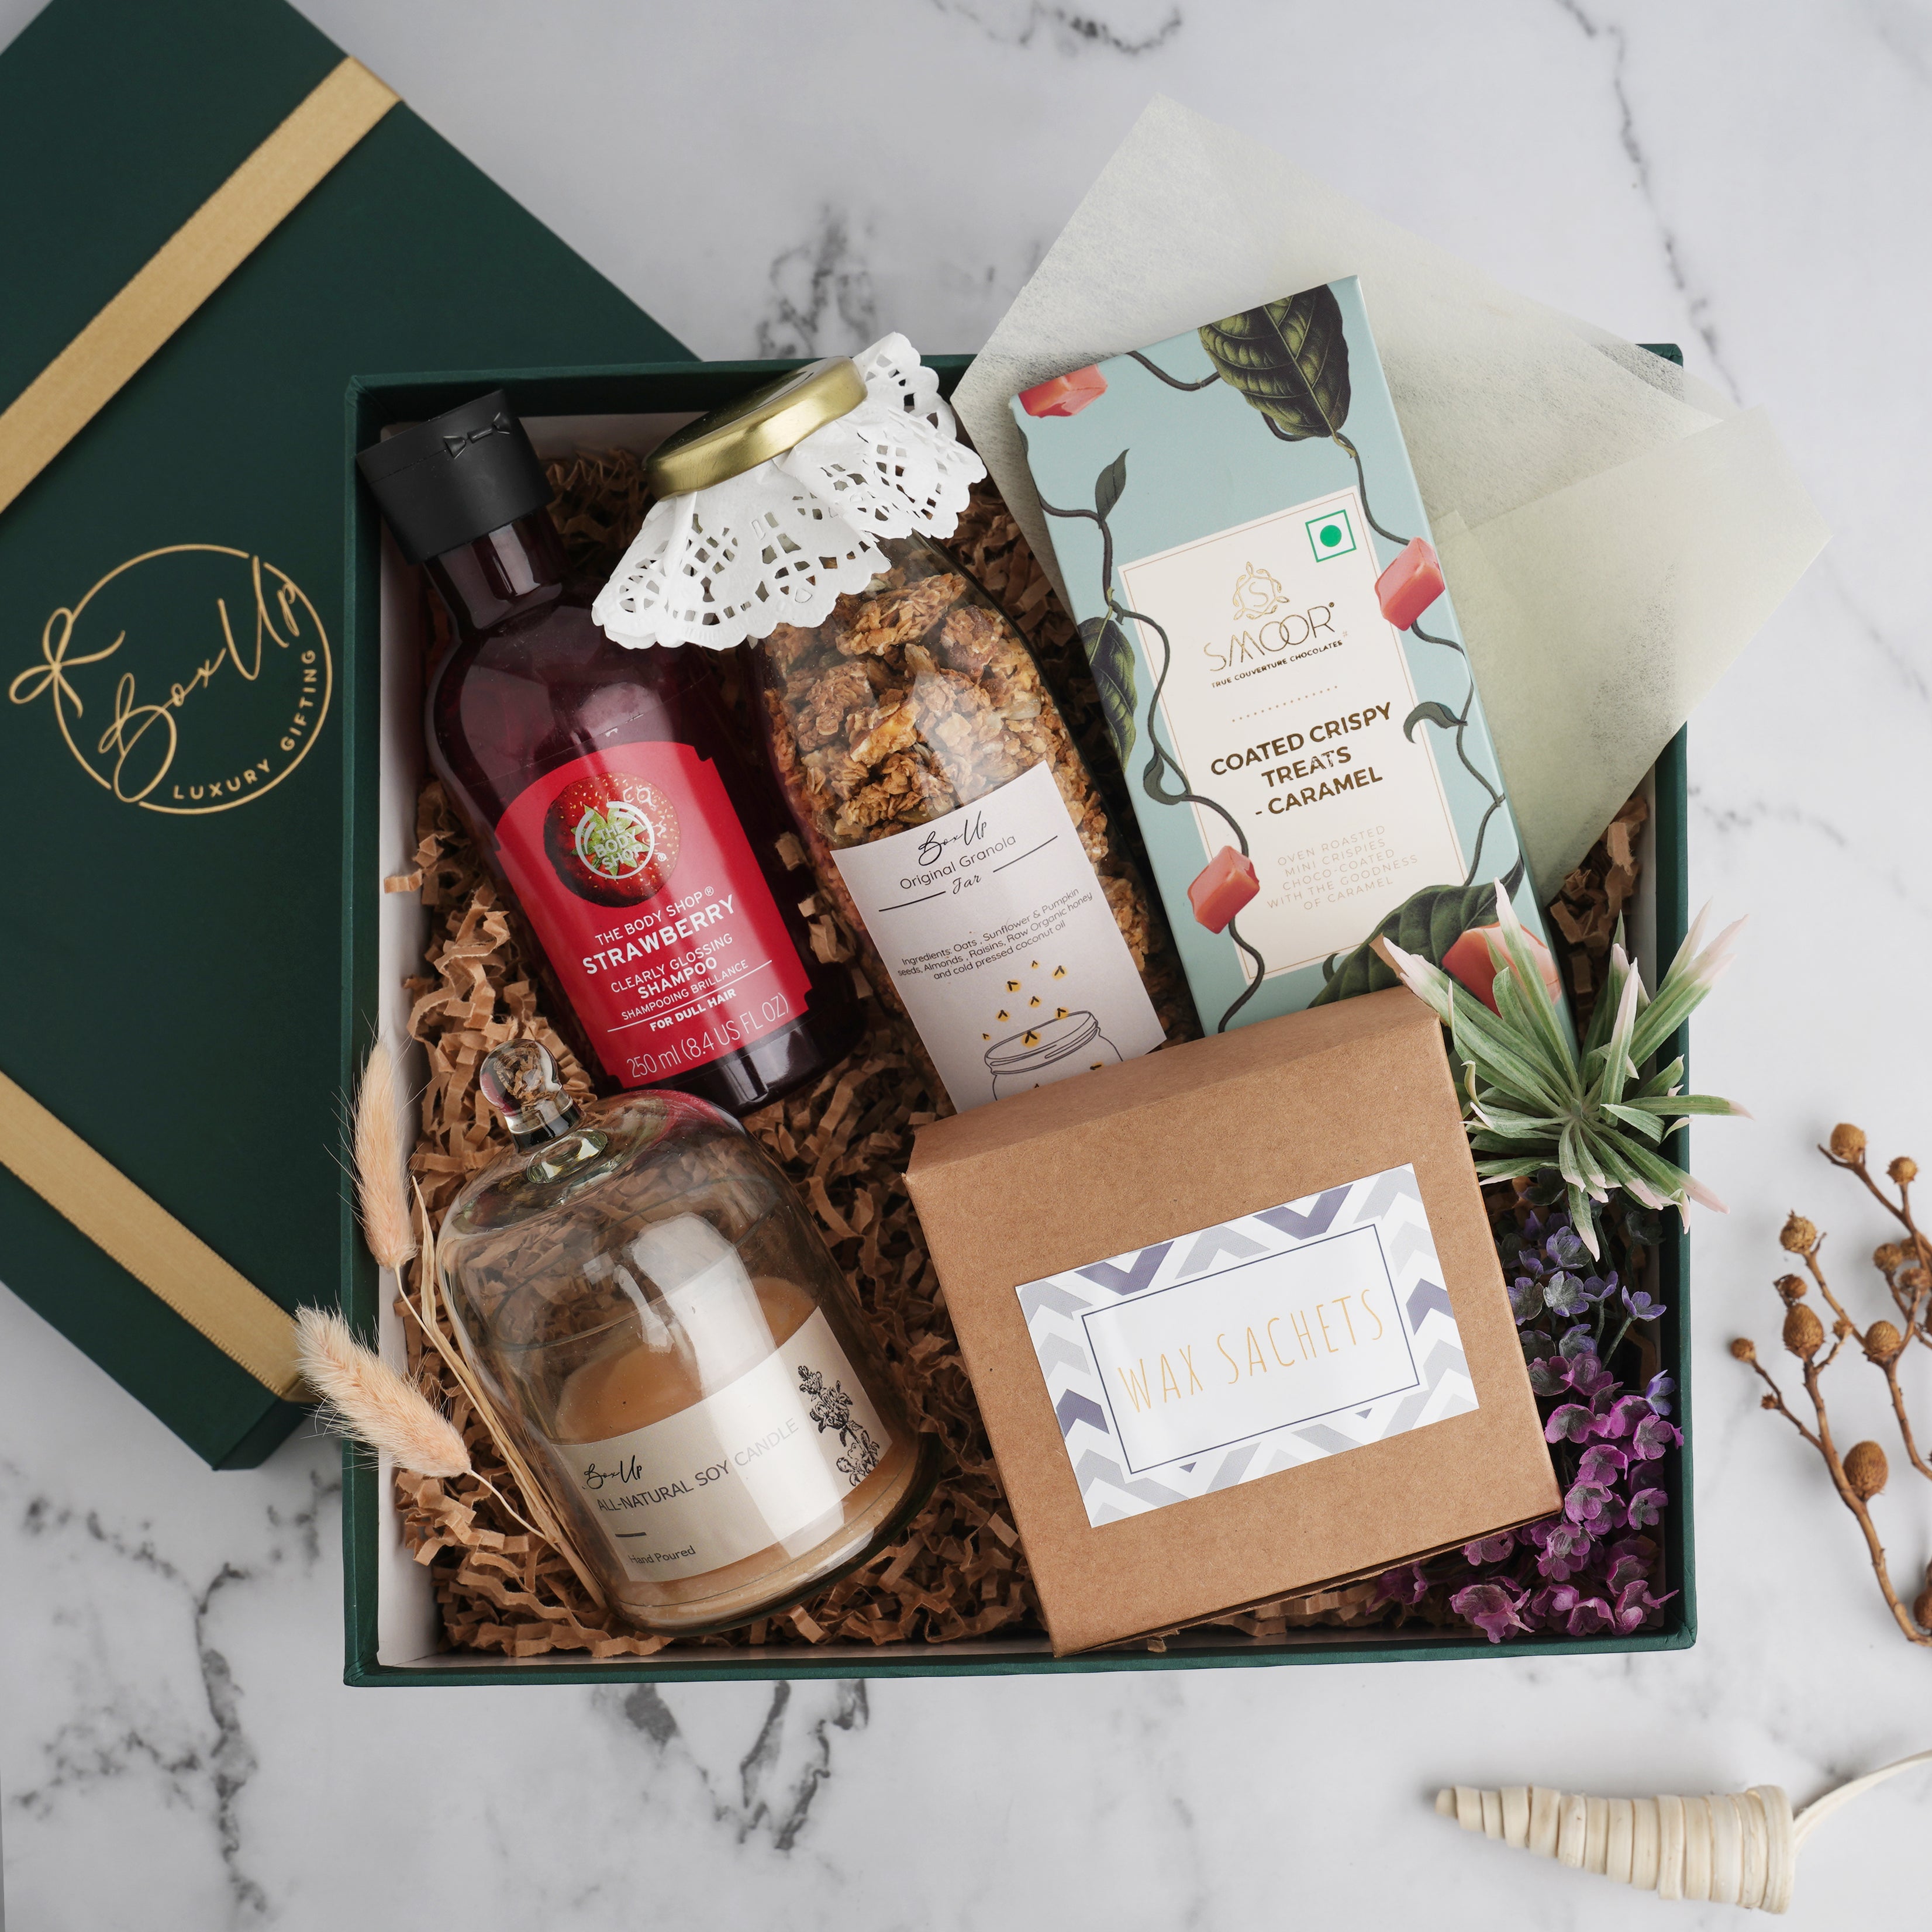 How to Start a Gift Basket Service: 7 Steps To Start Gift Basket Business